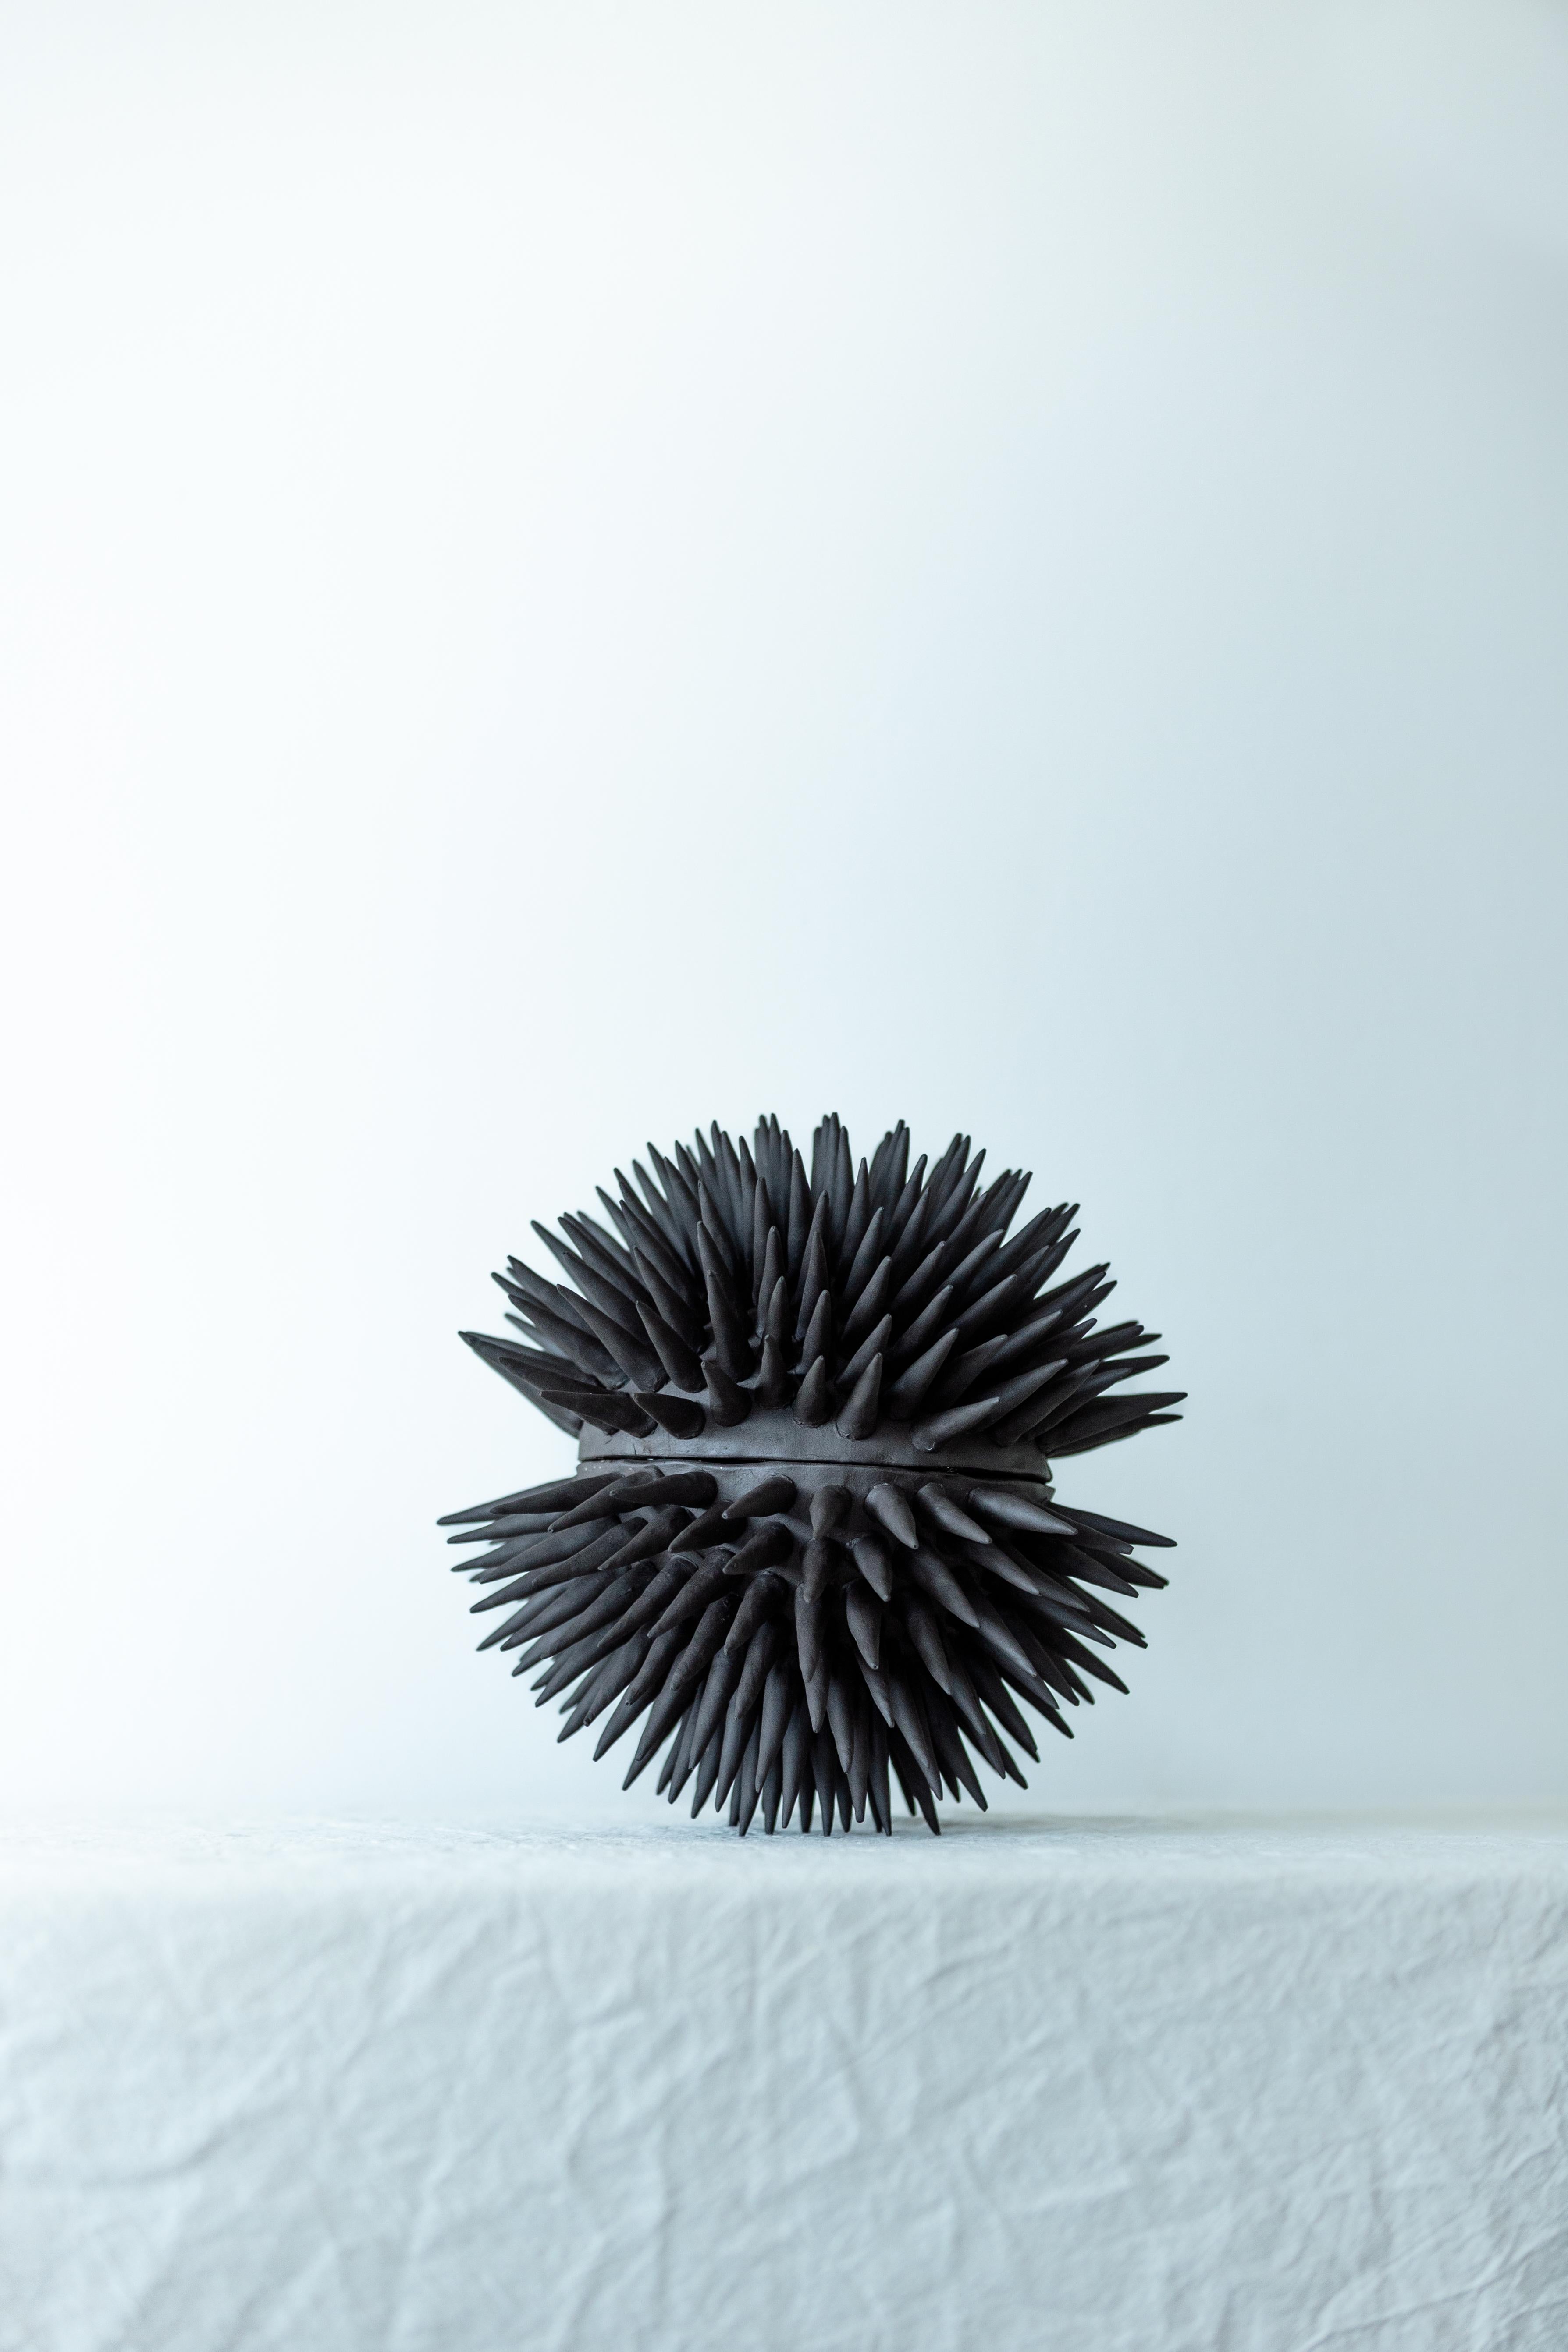 This 2-piece sea urchin inspired sculpture might be displayed as a single piece (when putting one half on top of the other) or used as a two very unique bowls (when split apart).

When mounted as a single piece, it measures approximately 30 cm in